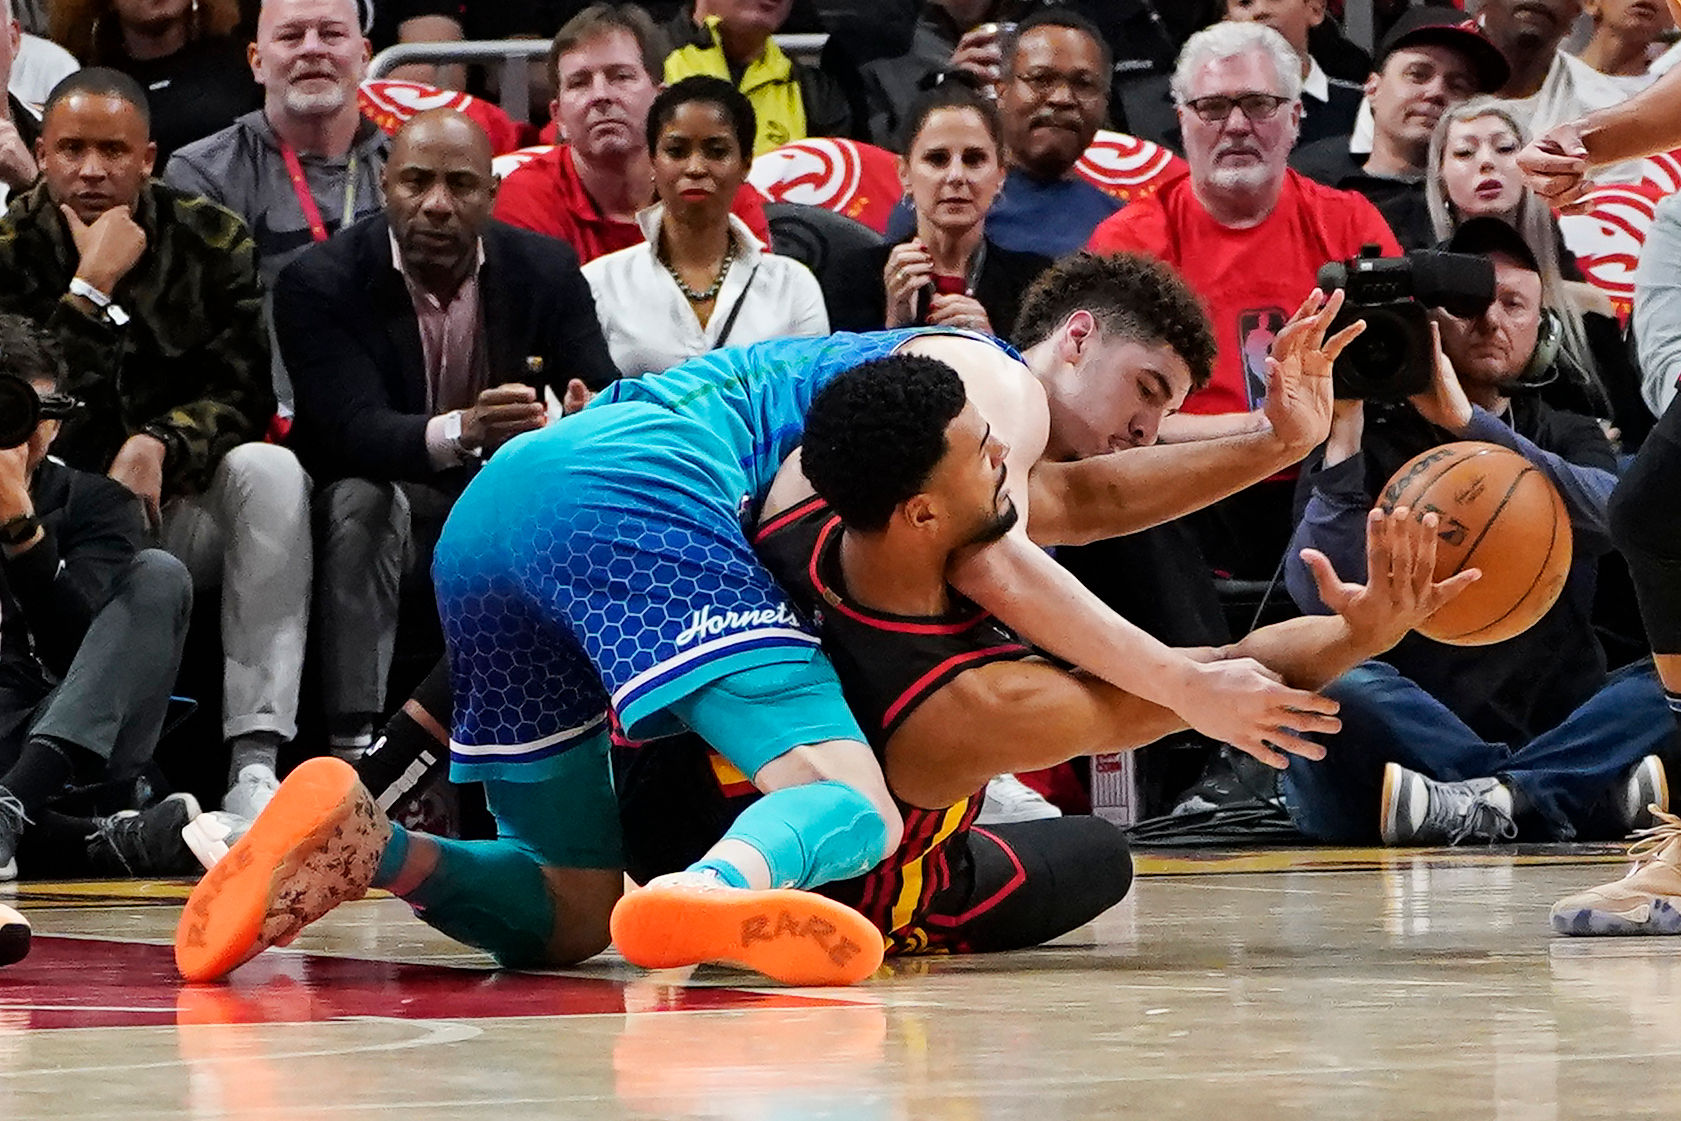 NBA: Trae Young, Hunter lead Hawks to 132-103 play-in rout of Charlotte Hornets